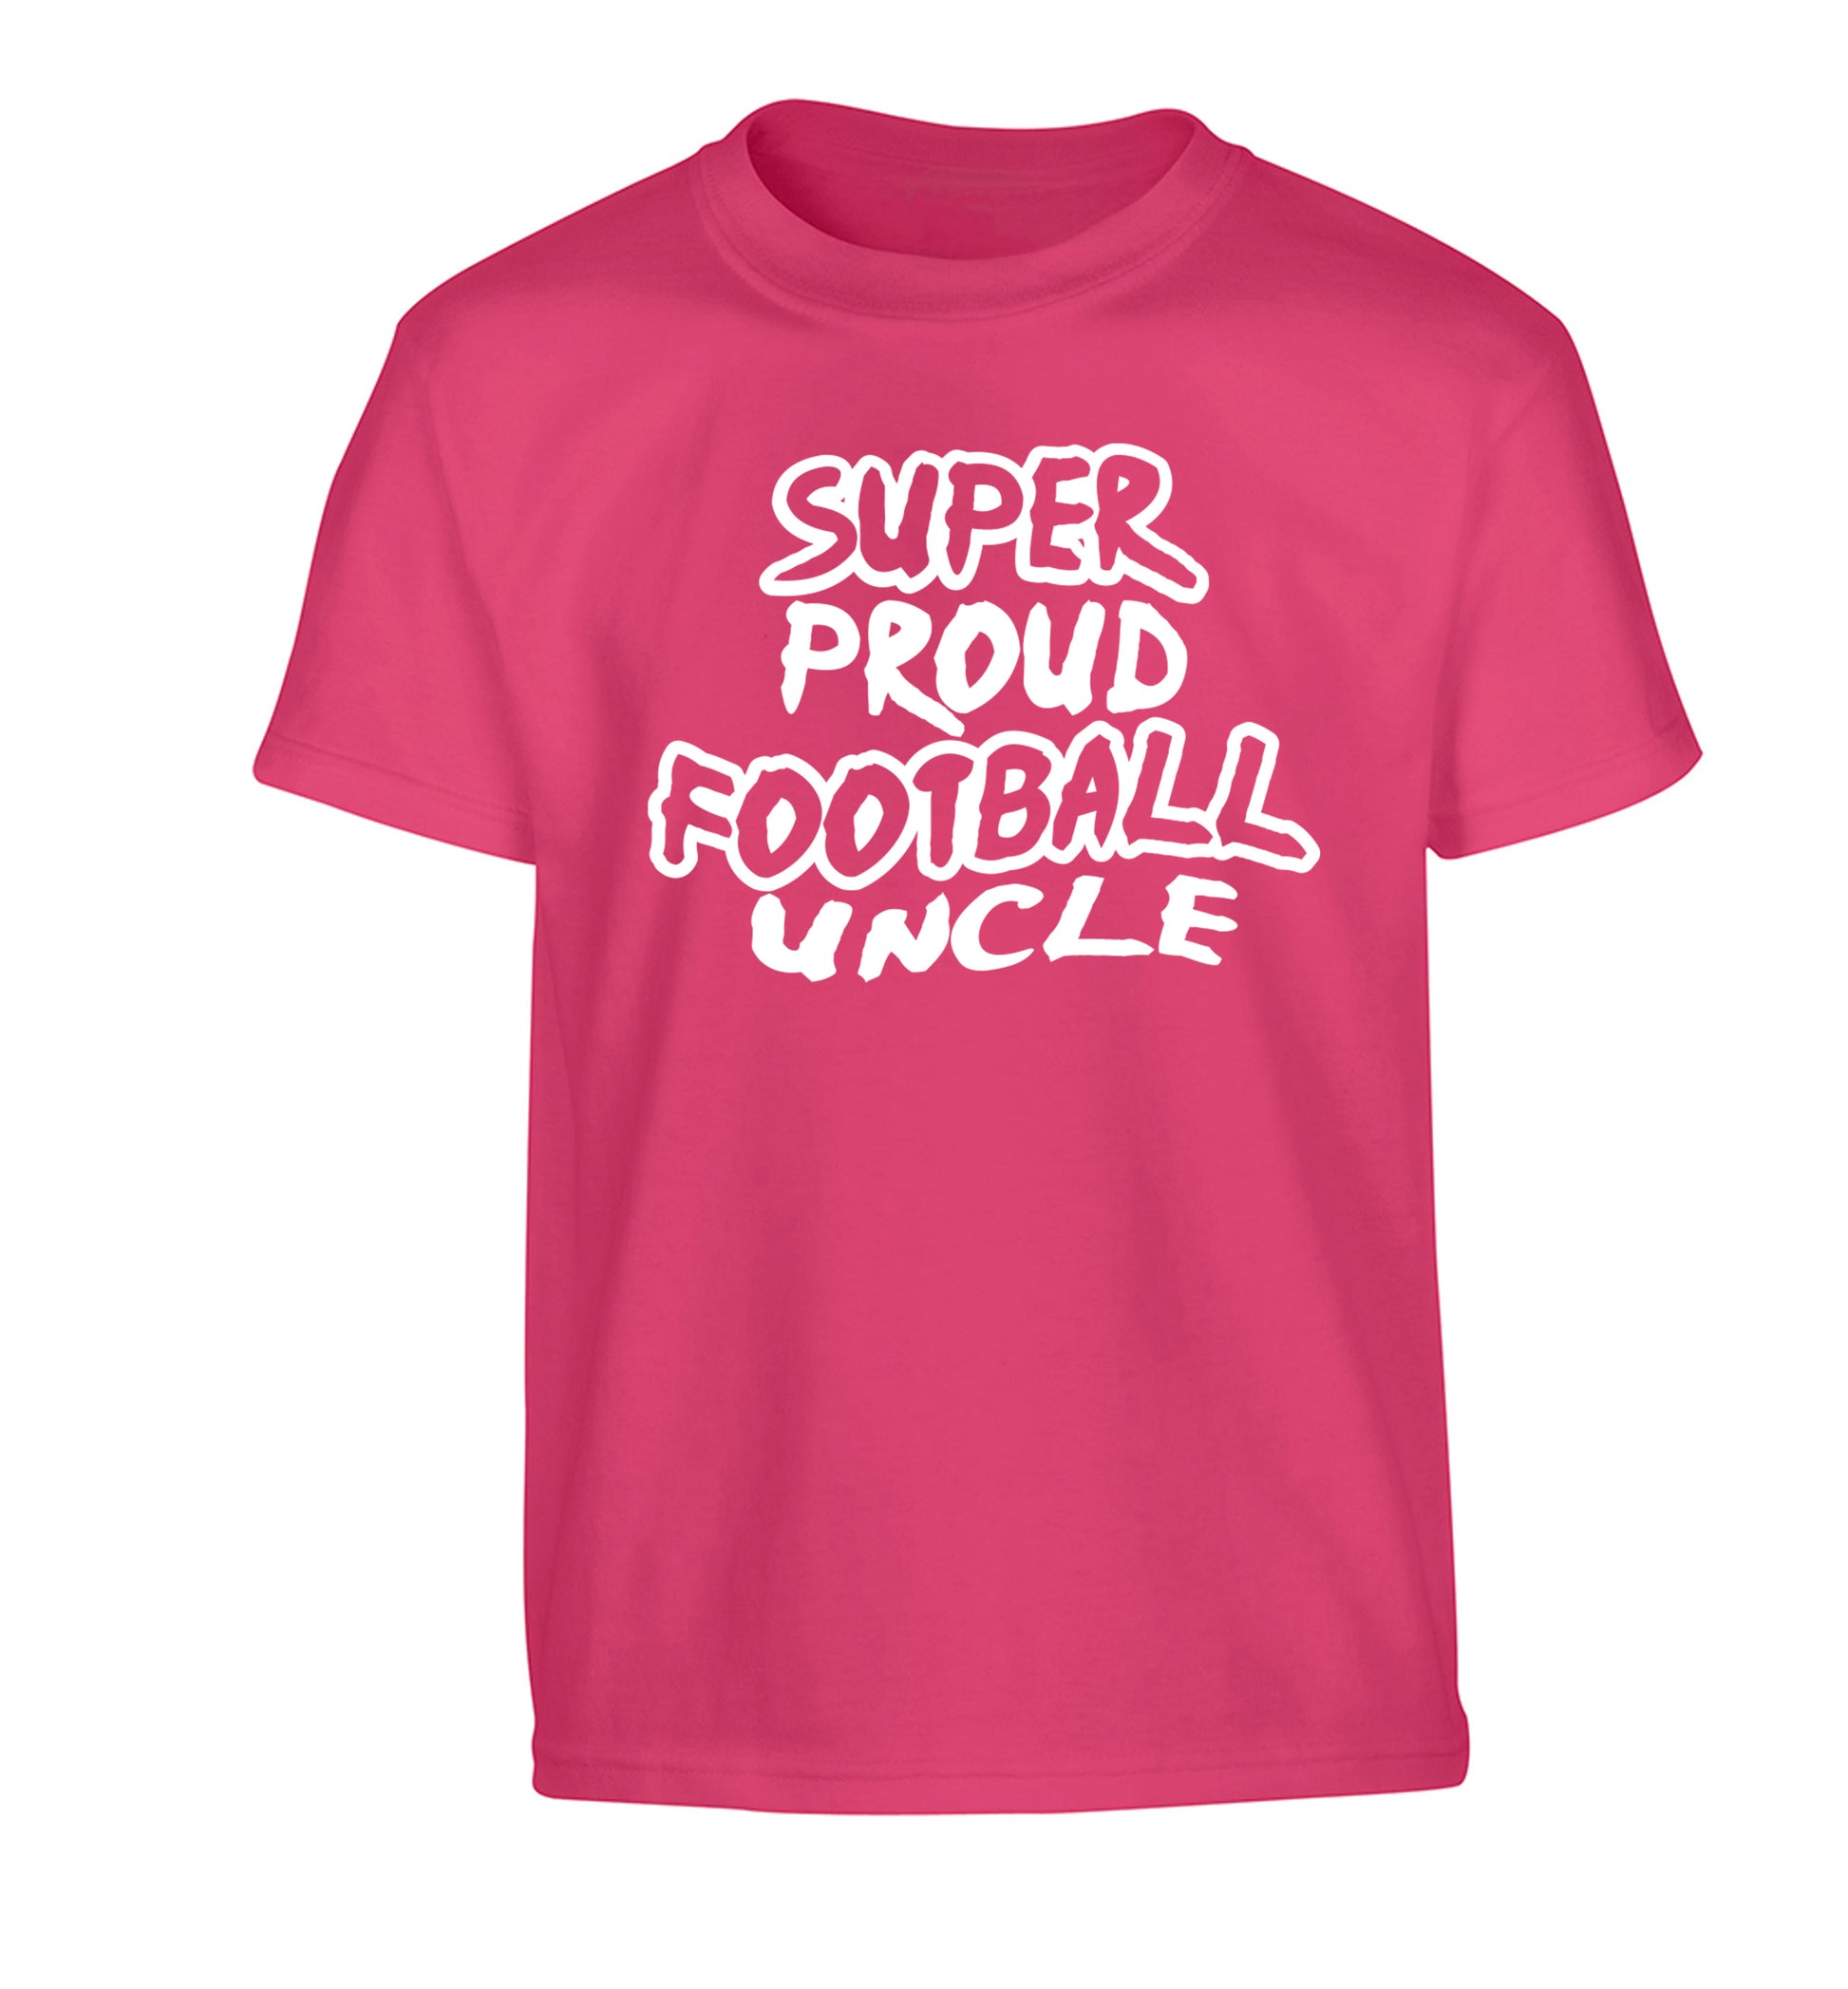 Super proud football uncle Children's pink Tshirt 12-14 Years